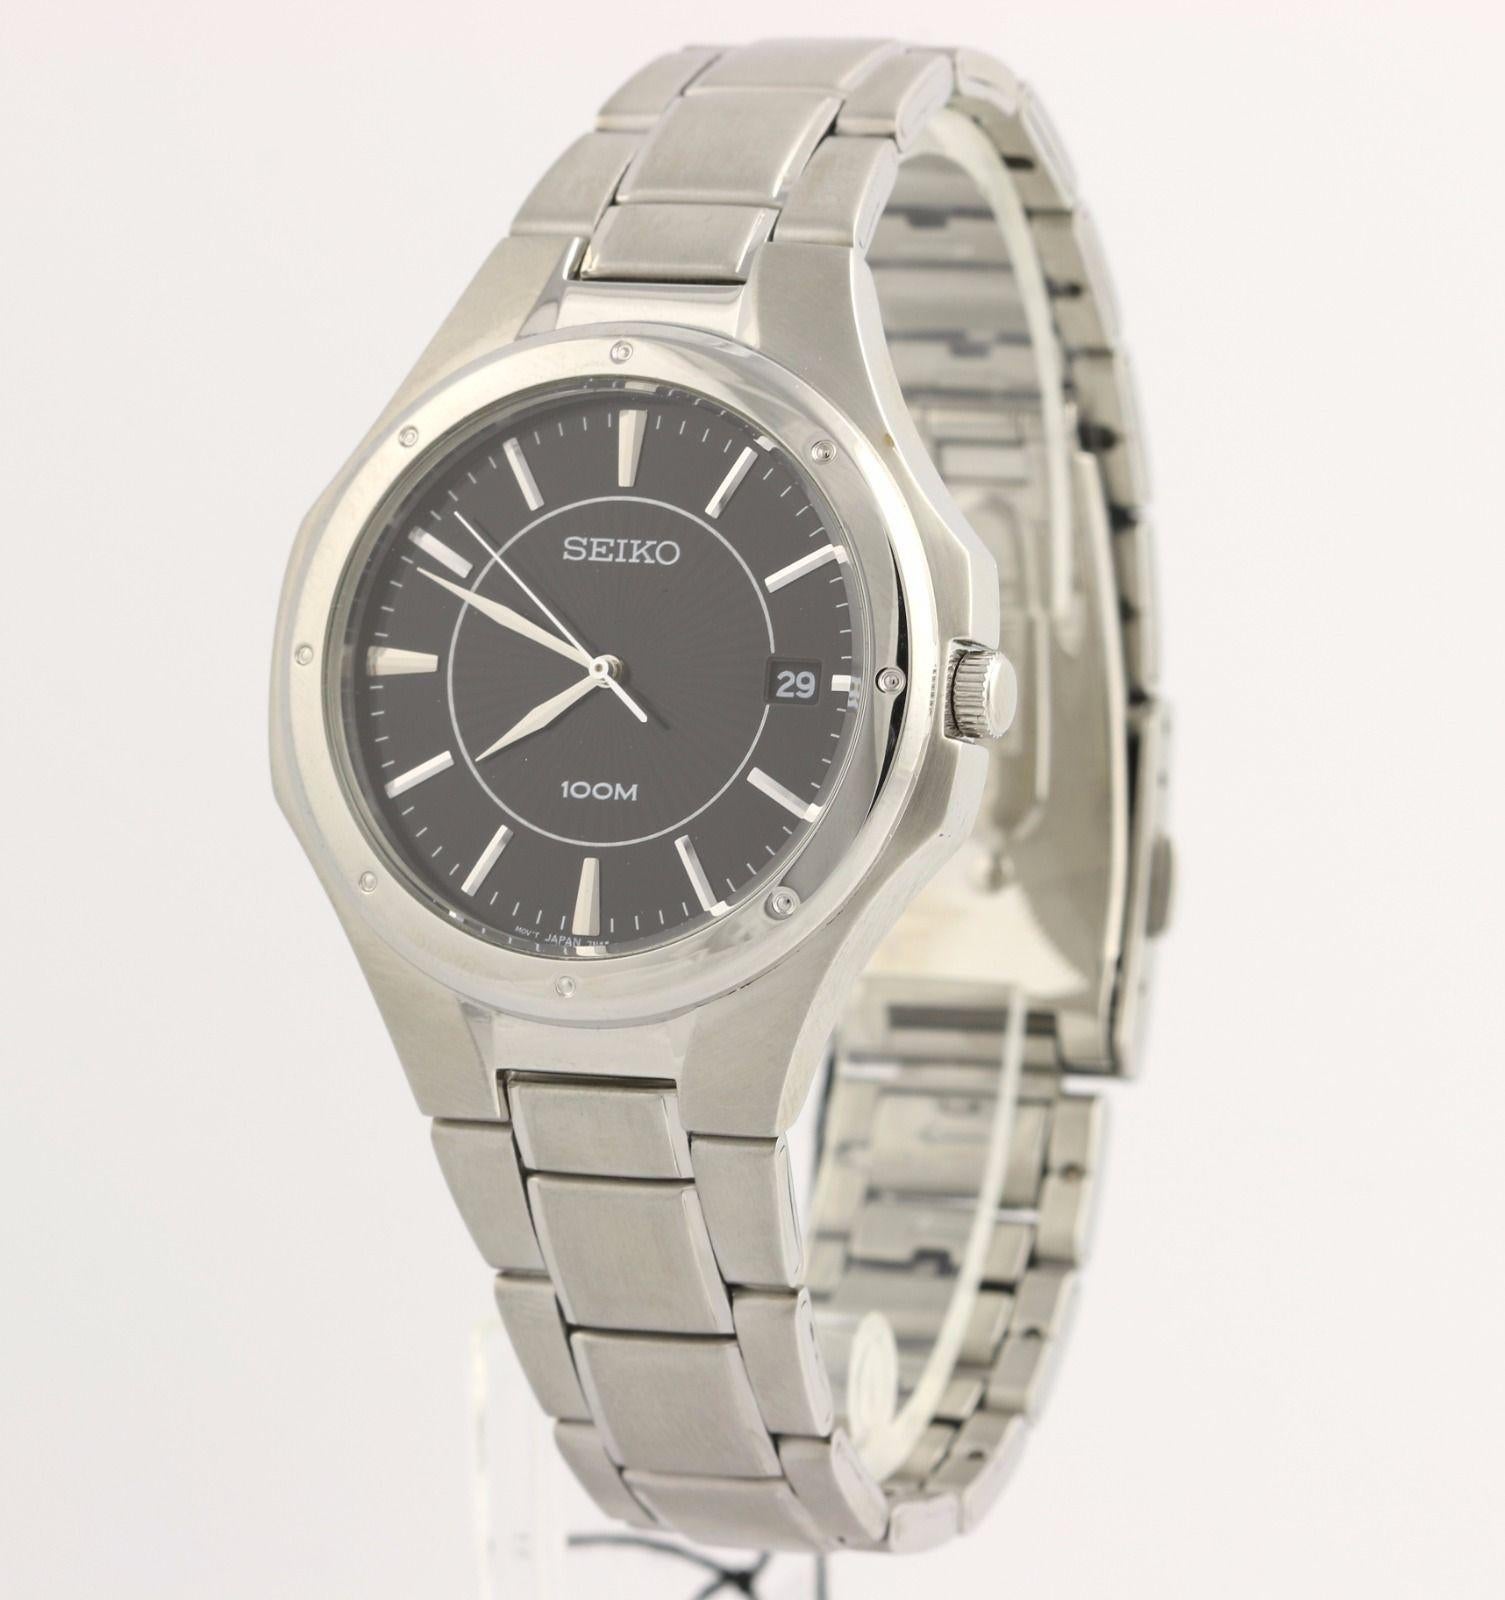 This handsome watch is sure to please! Designed by Seiko, this brand new SGEF61 dress watch is one that will work for any occasion. The stainless steel body features a large, easily visible face. The striking black dial creates an ideal background